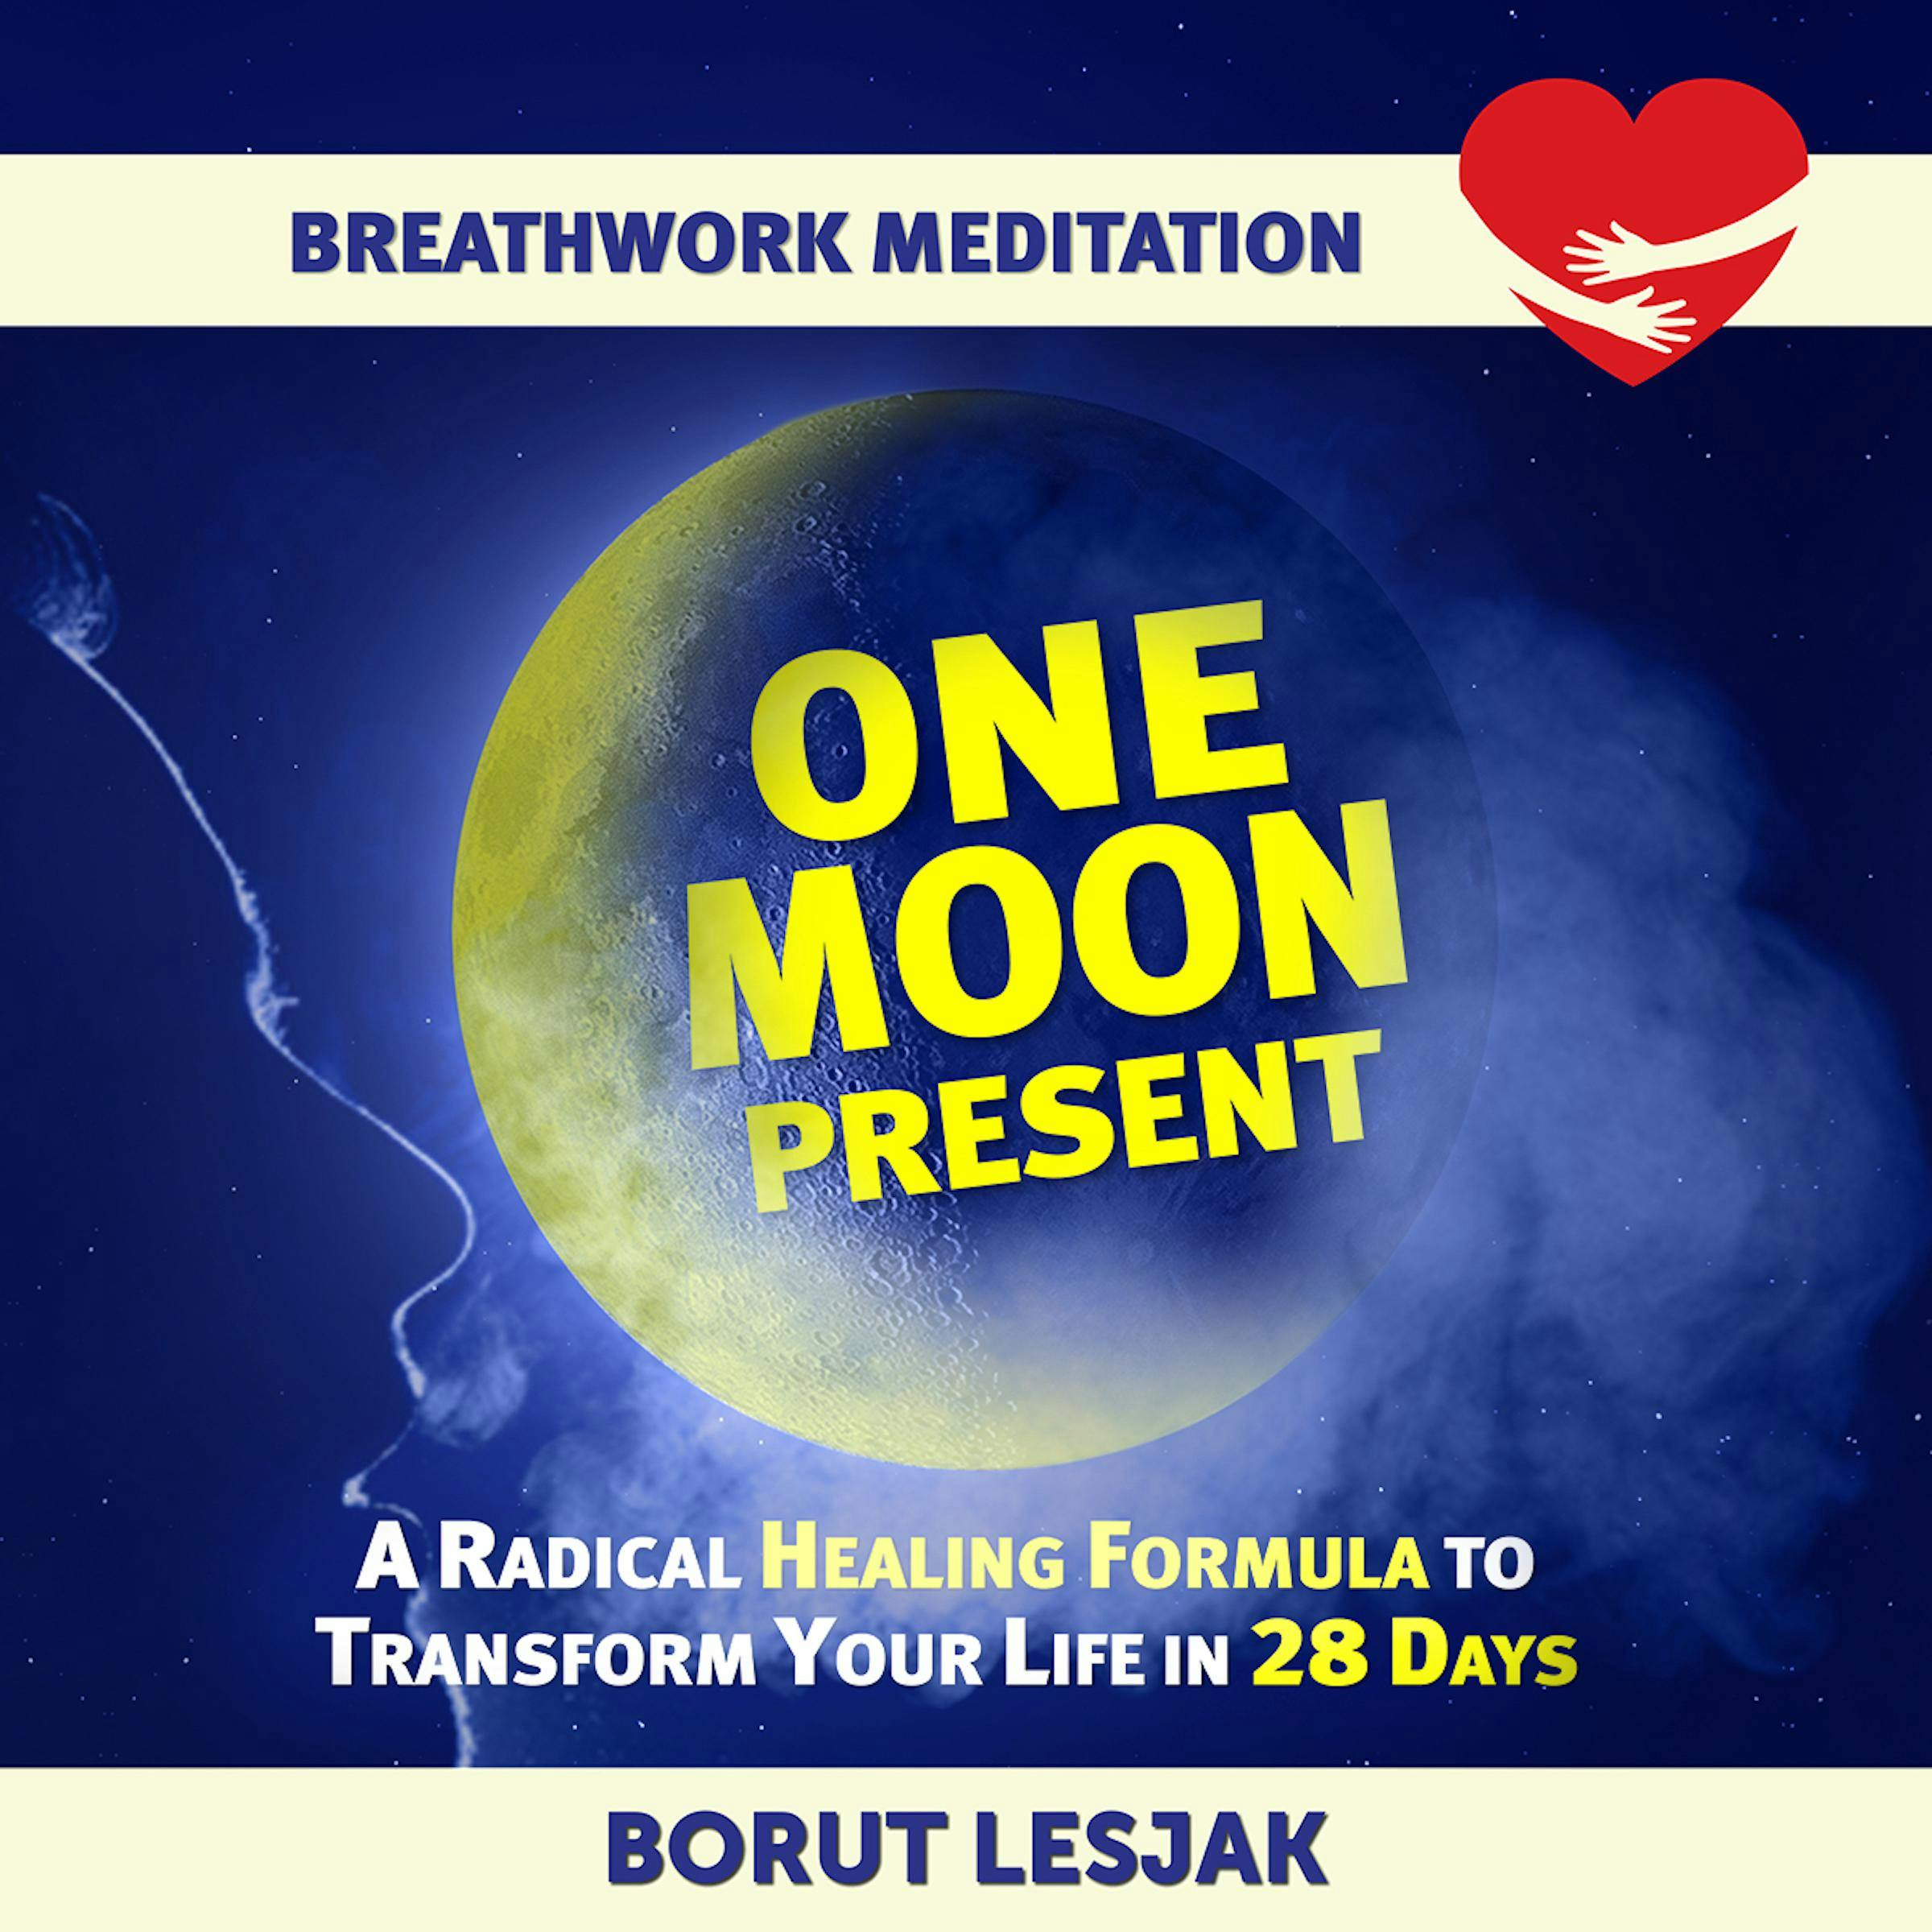 One Moon Present Breathwork Meditation: A Radical Healing Formula to Transform Your Life in 28 Days - undefined